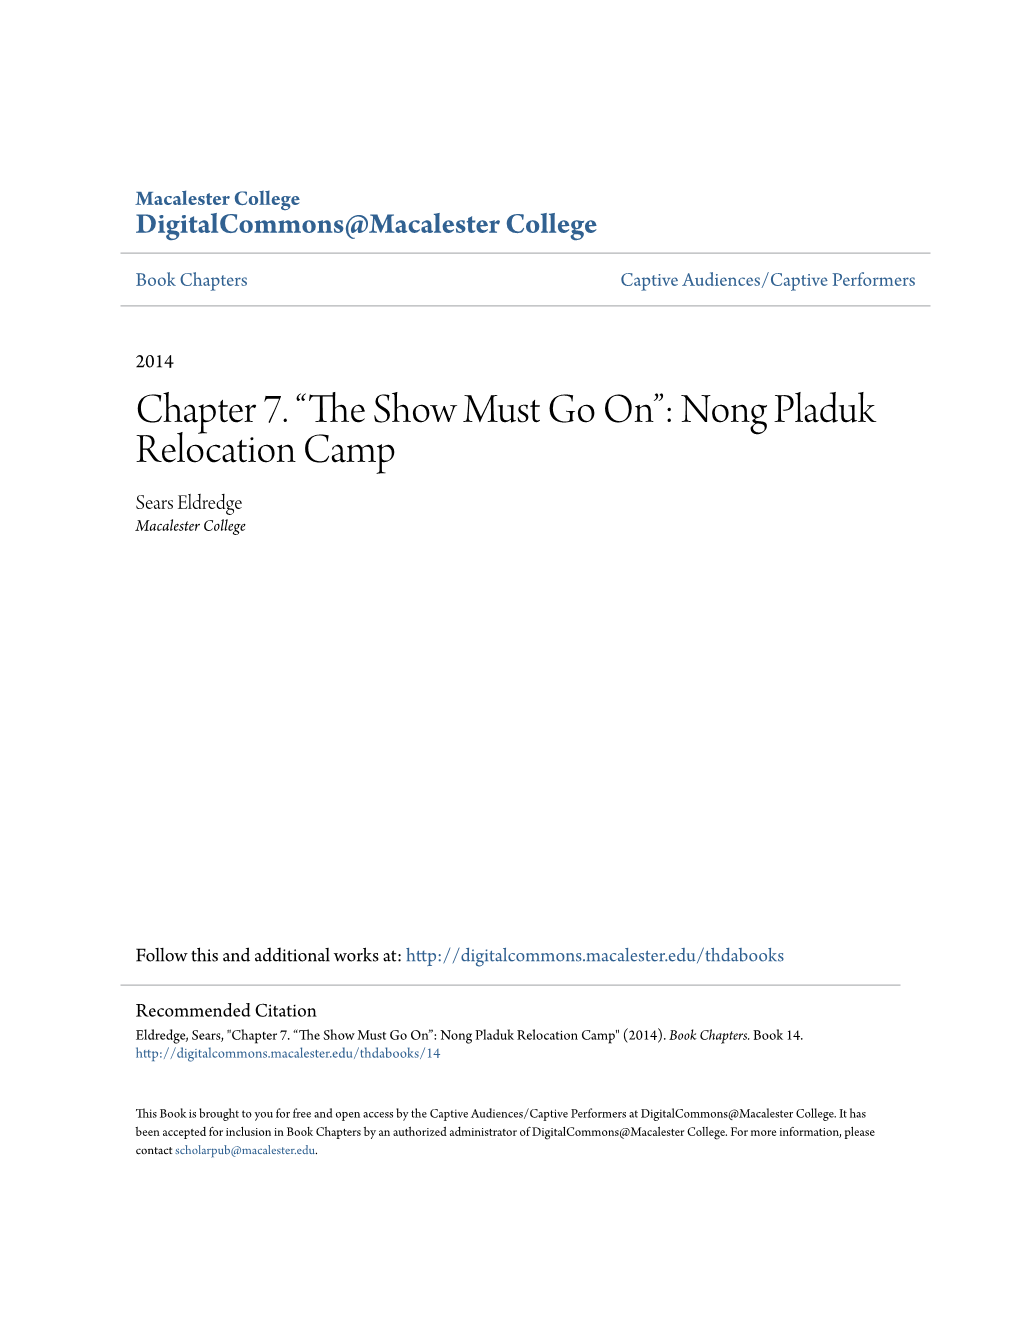 Chapter 7. “The Show Must Go On”: Nong Pladuk Relocation Camp